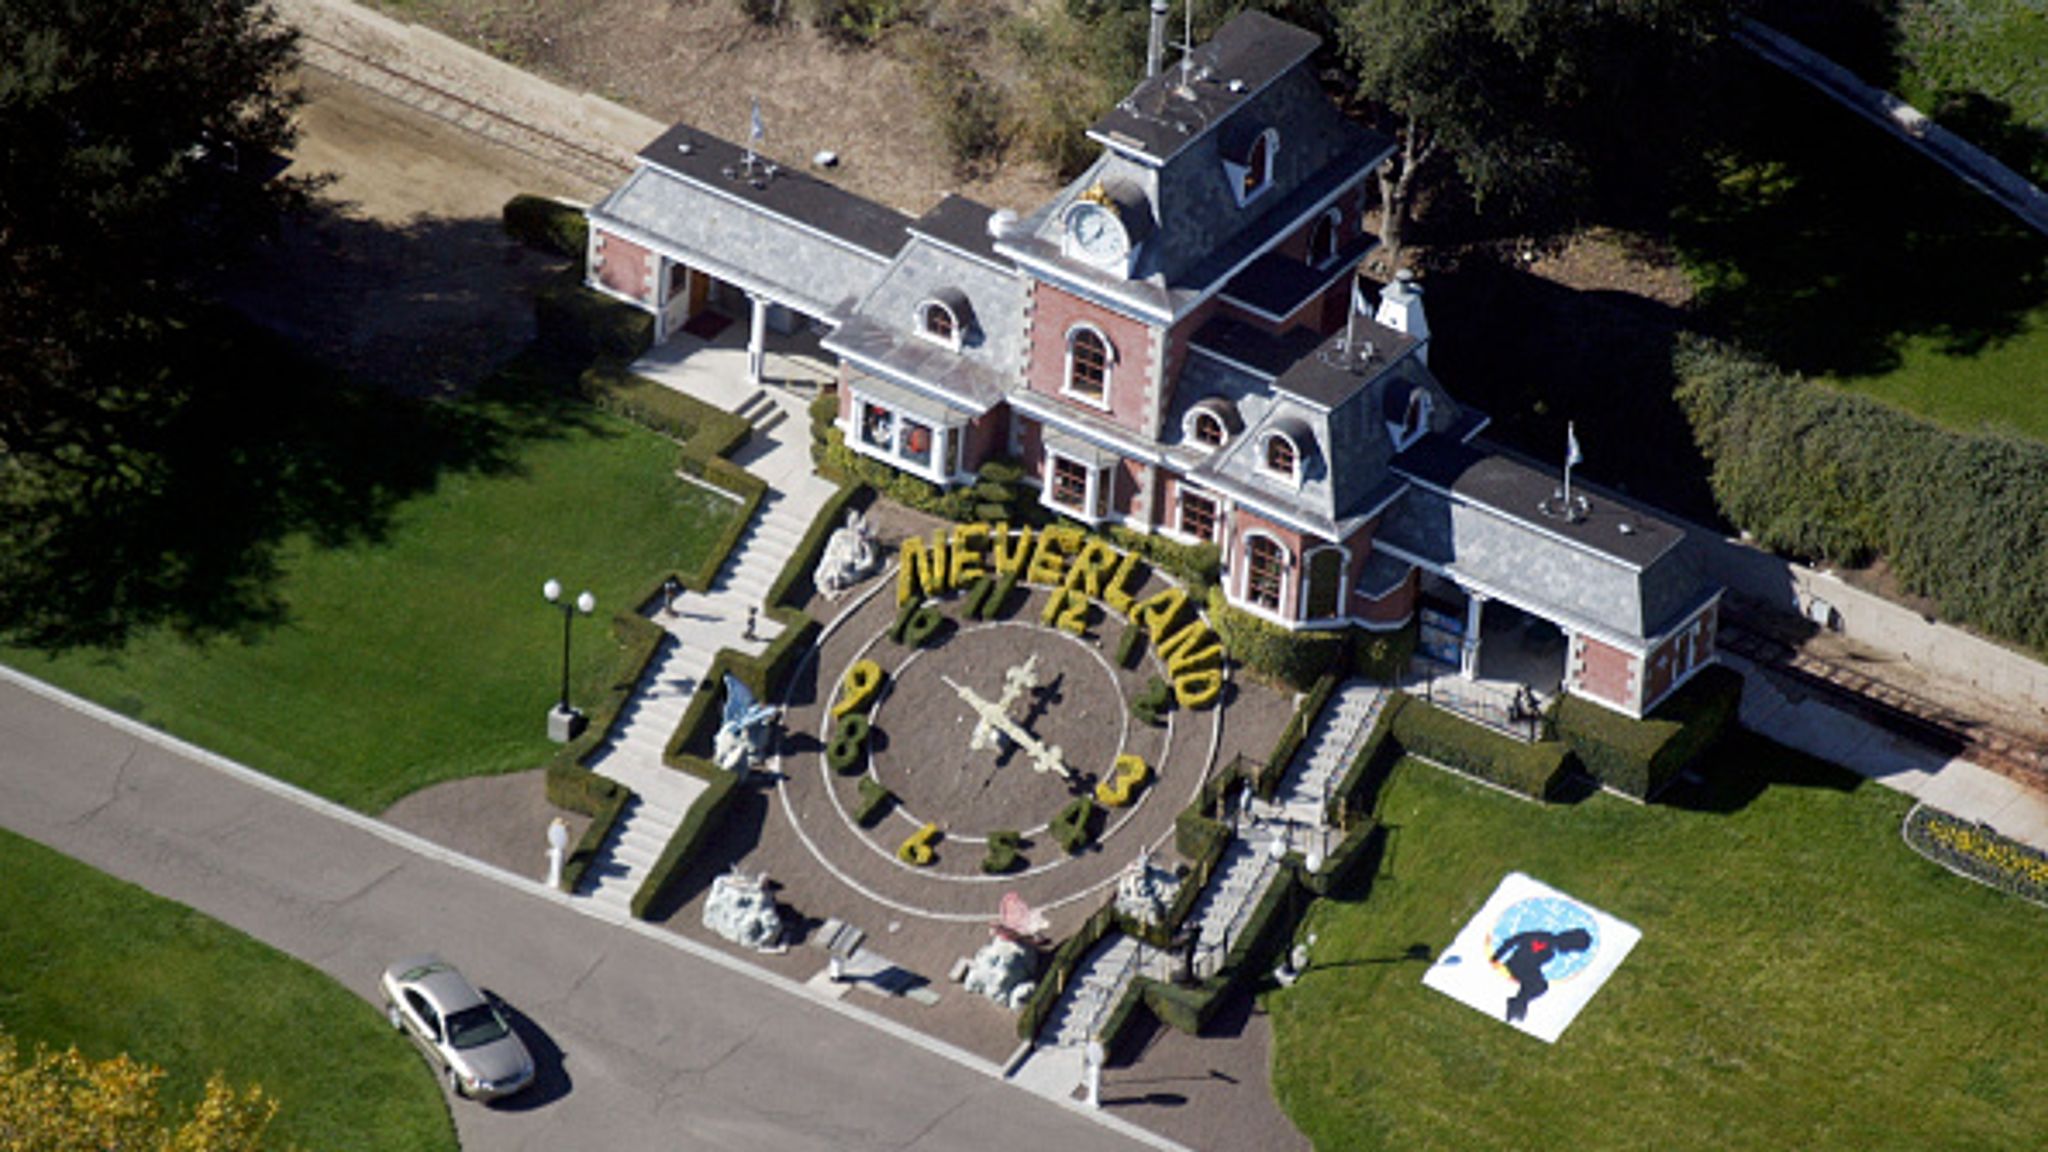 Michael Jackson's Neverland ranch finally sells - but for fraction of original asking price | US News | Sky News